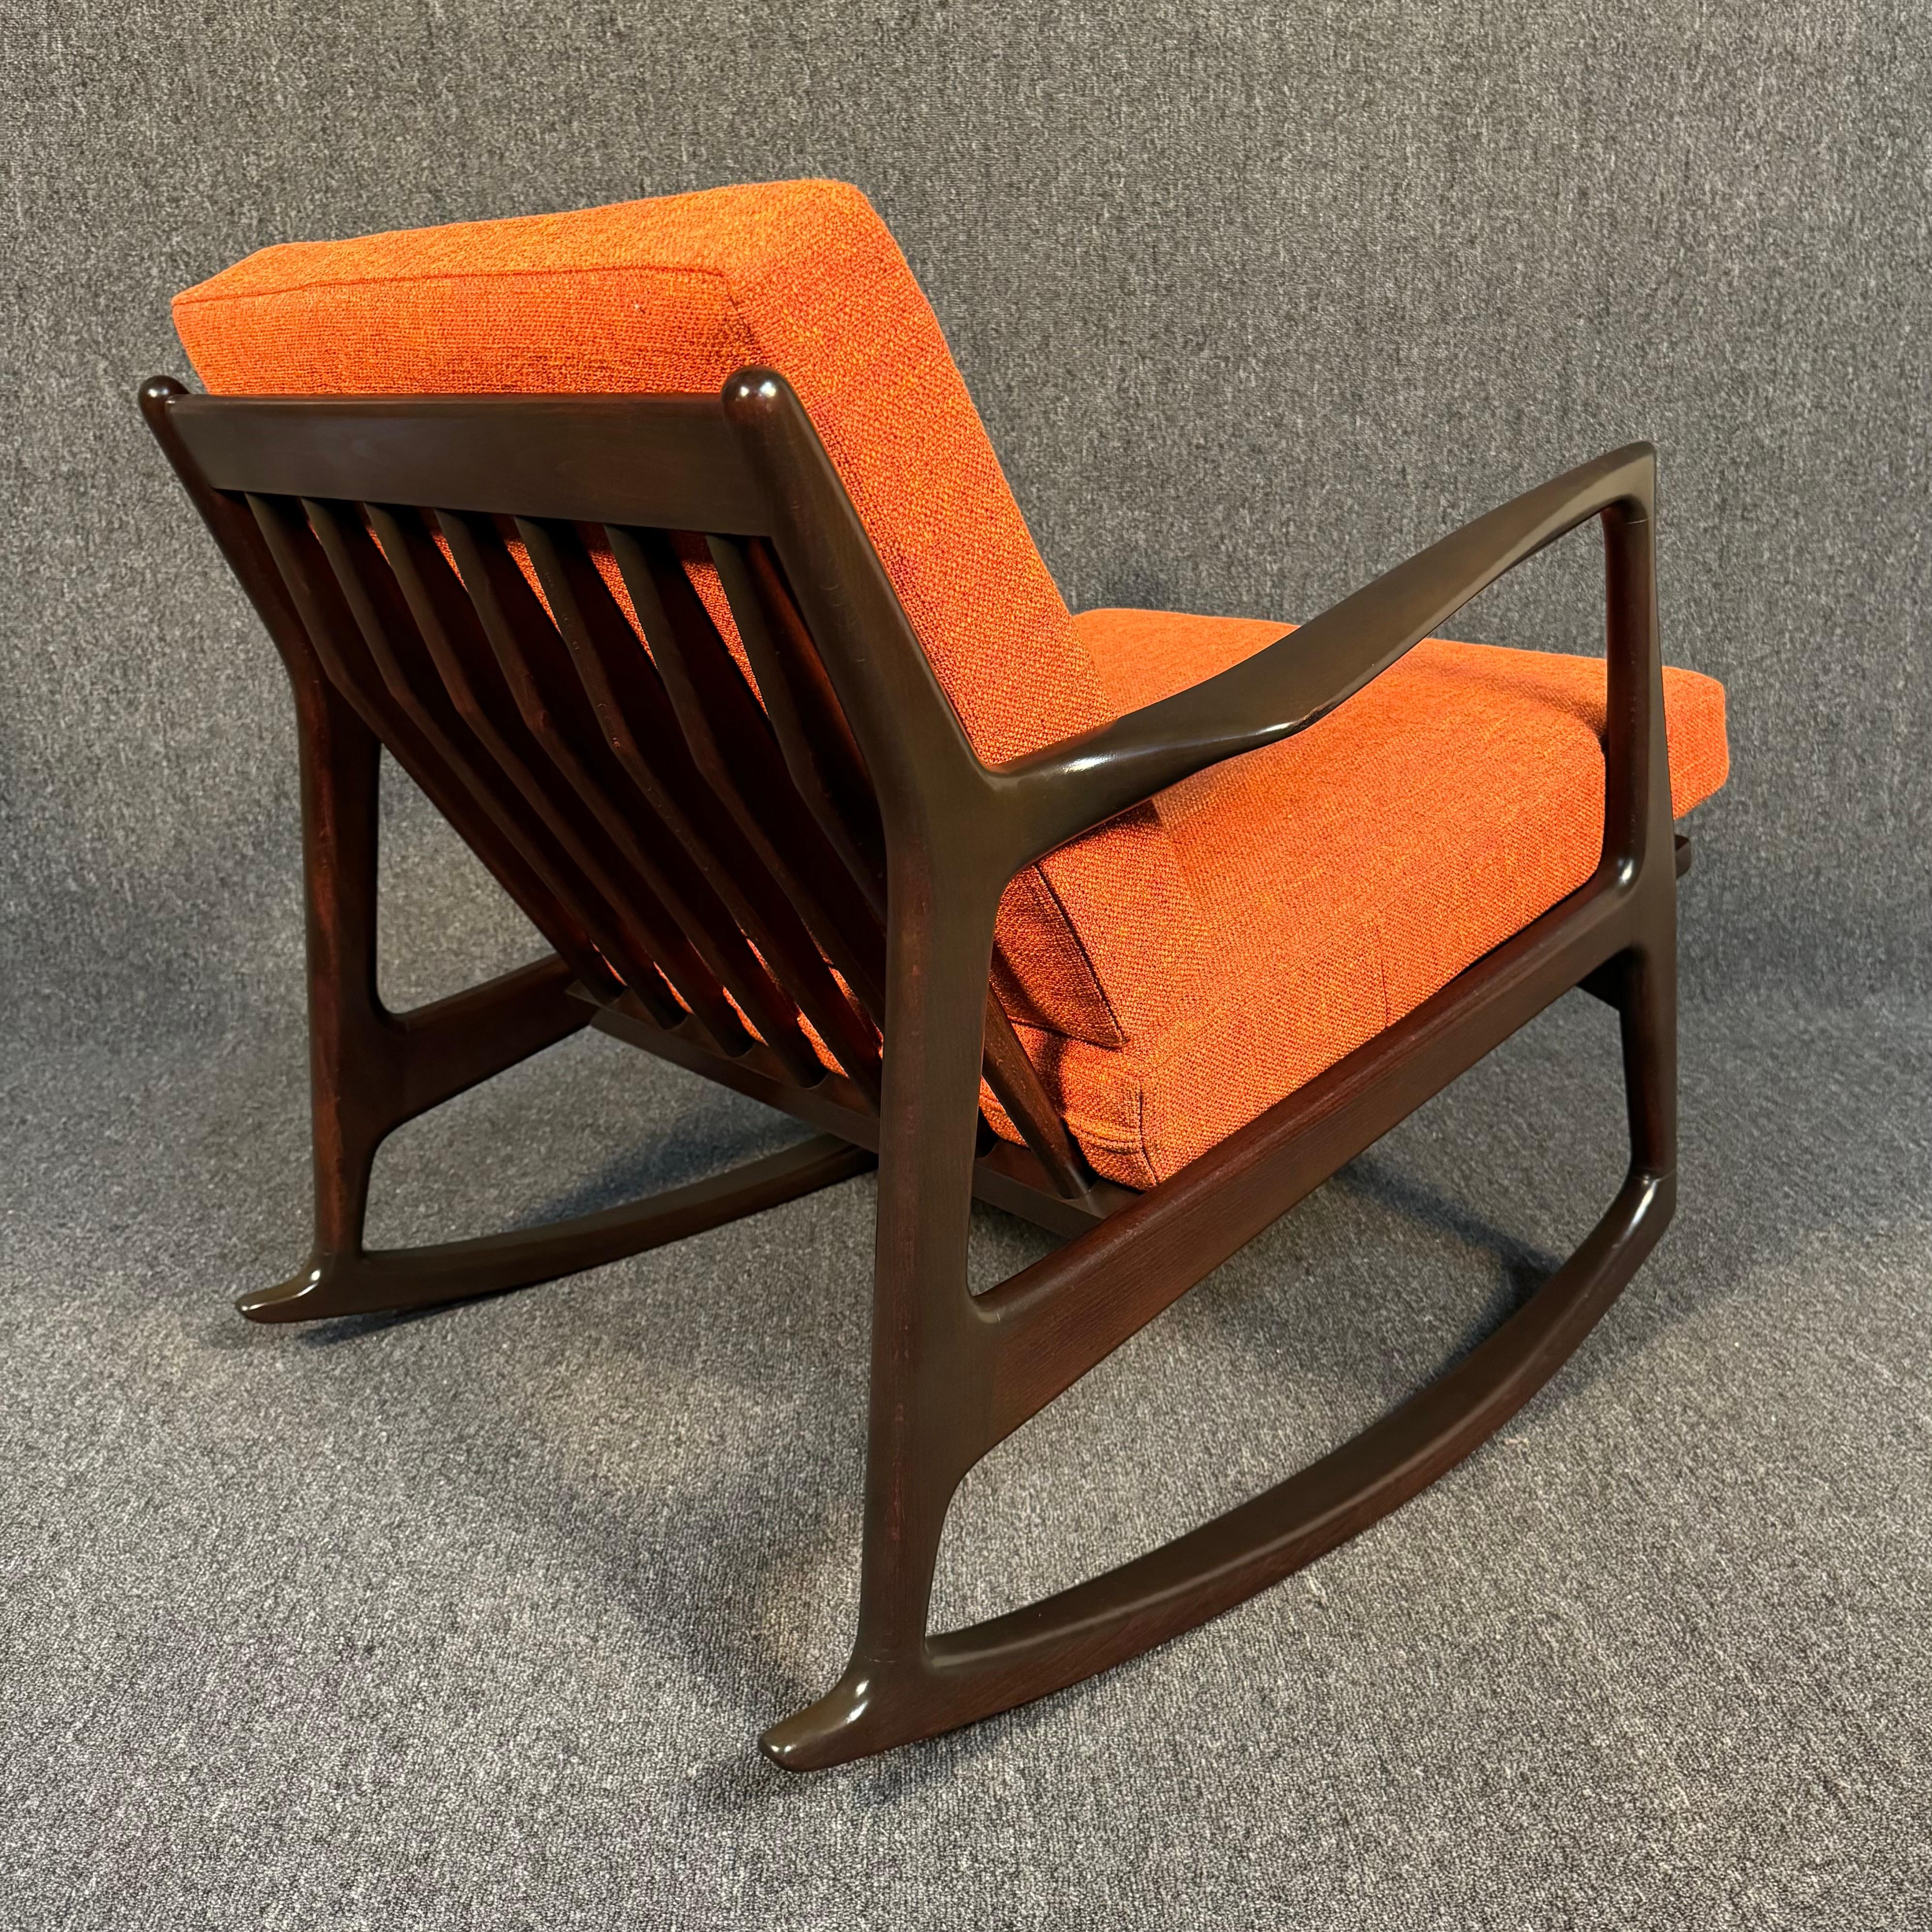 Mid-20th Century Vintage Danish Mid Century Modern Rocking Chair by Kofod Larsen for Selig For Sale